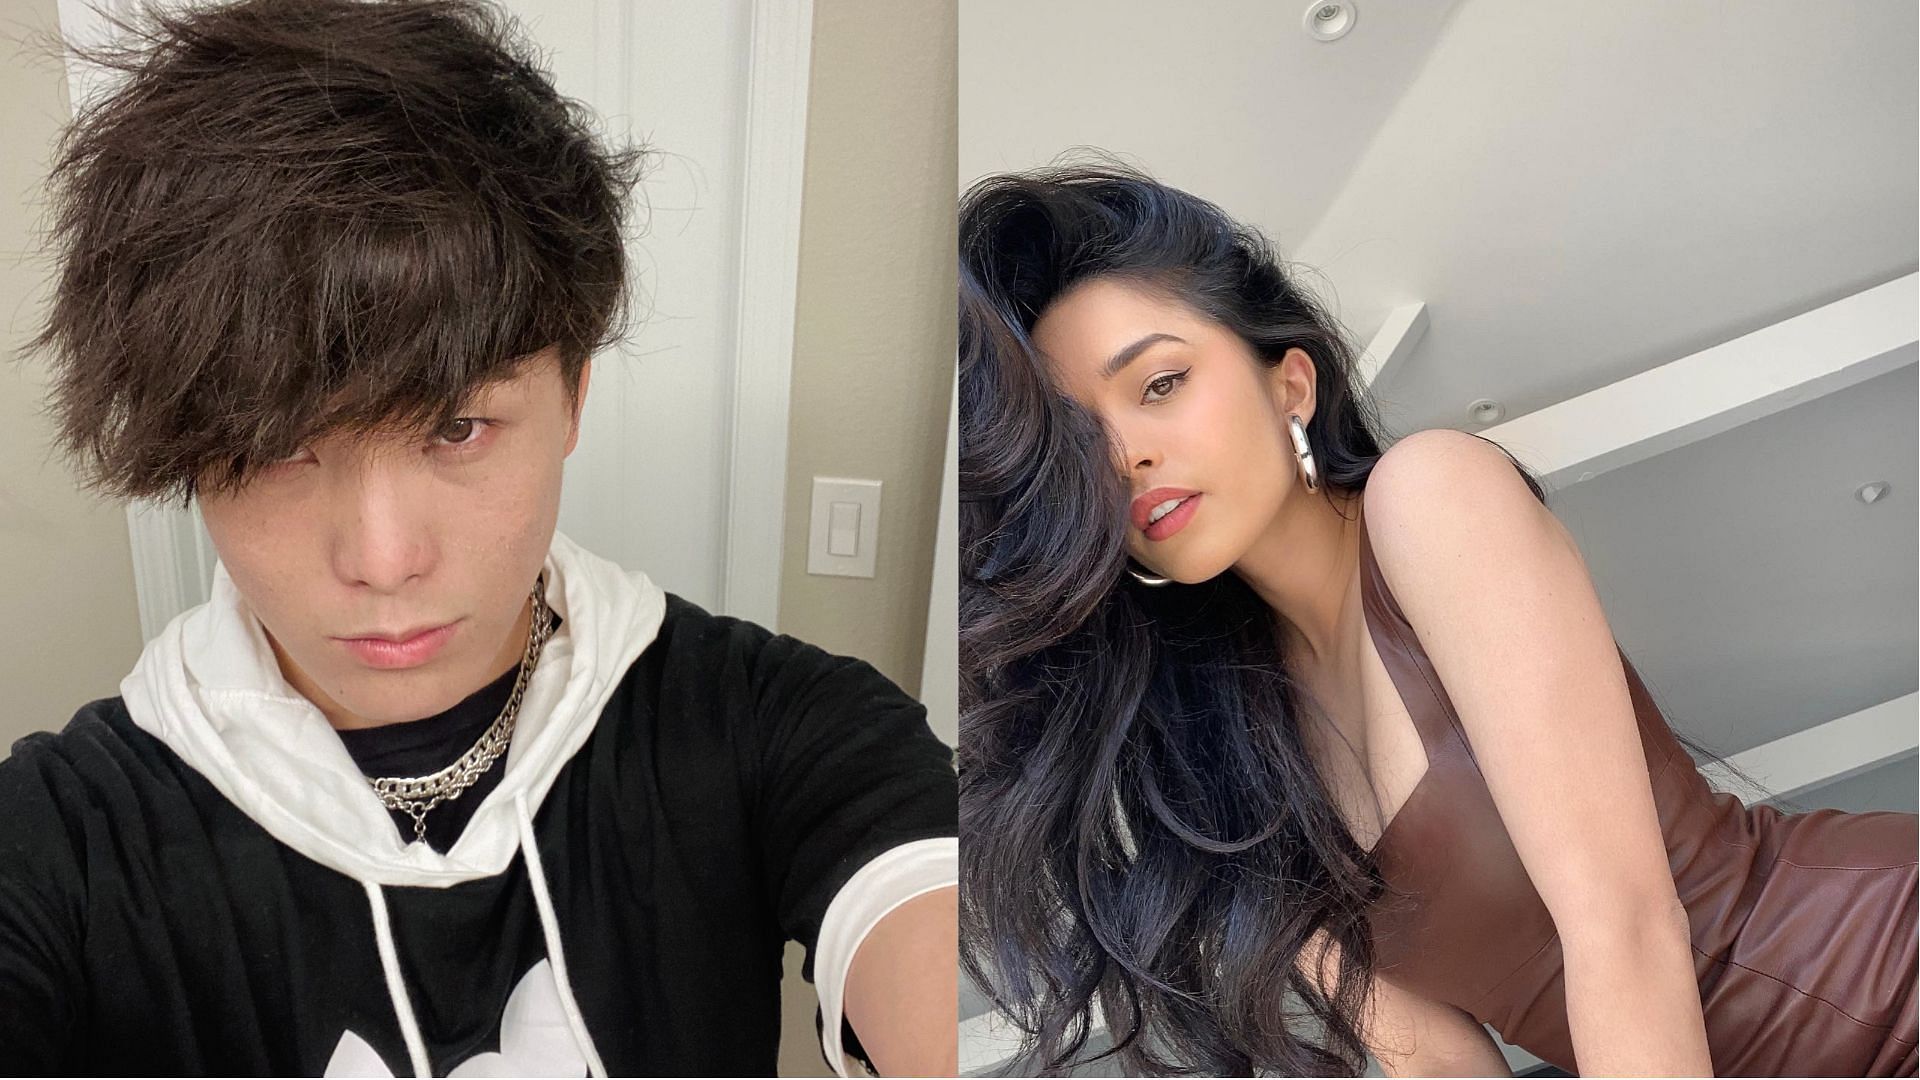 Sykkuno confirms he is not joining Valkyrae for her upcoming Japan trip (Image via- Sykkuno, Valkyrae/Twitter)